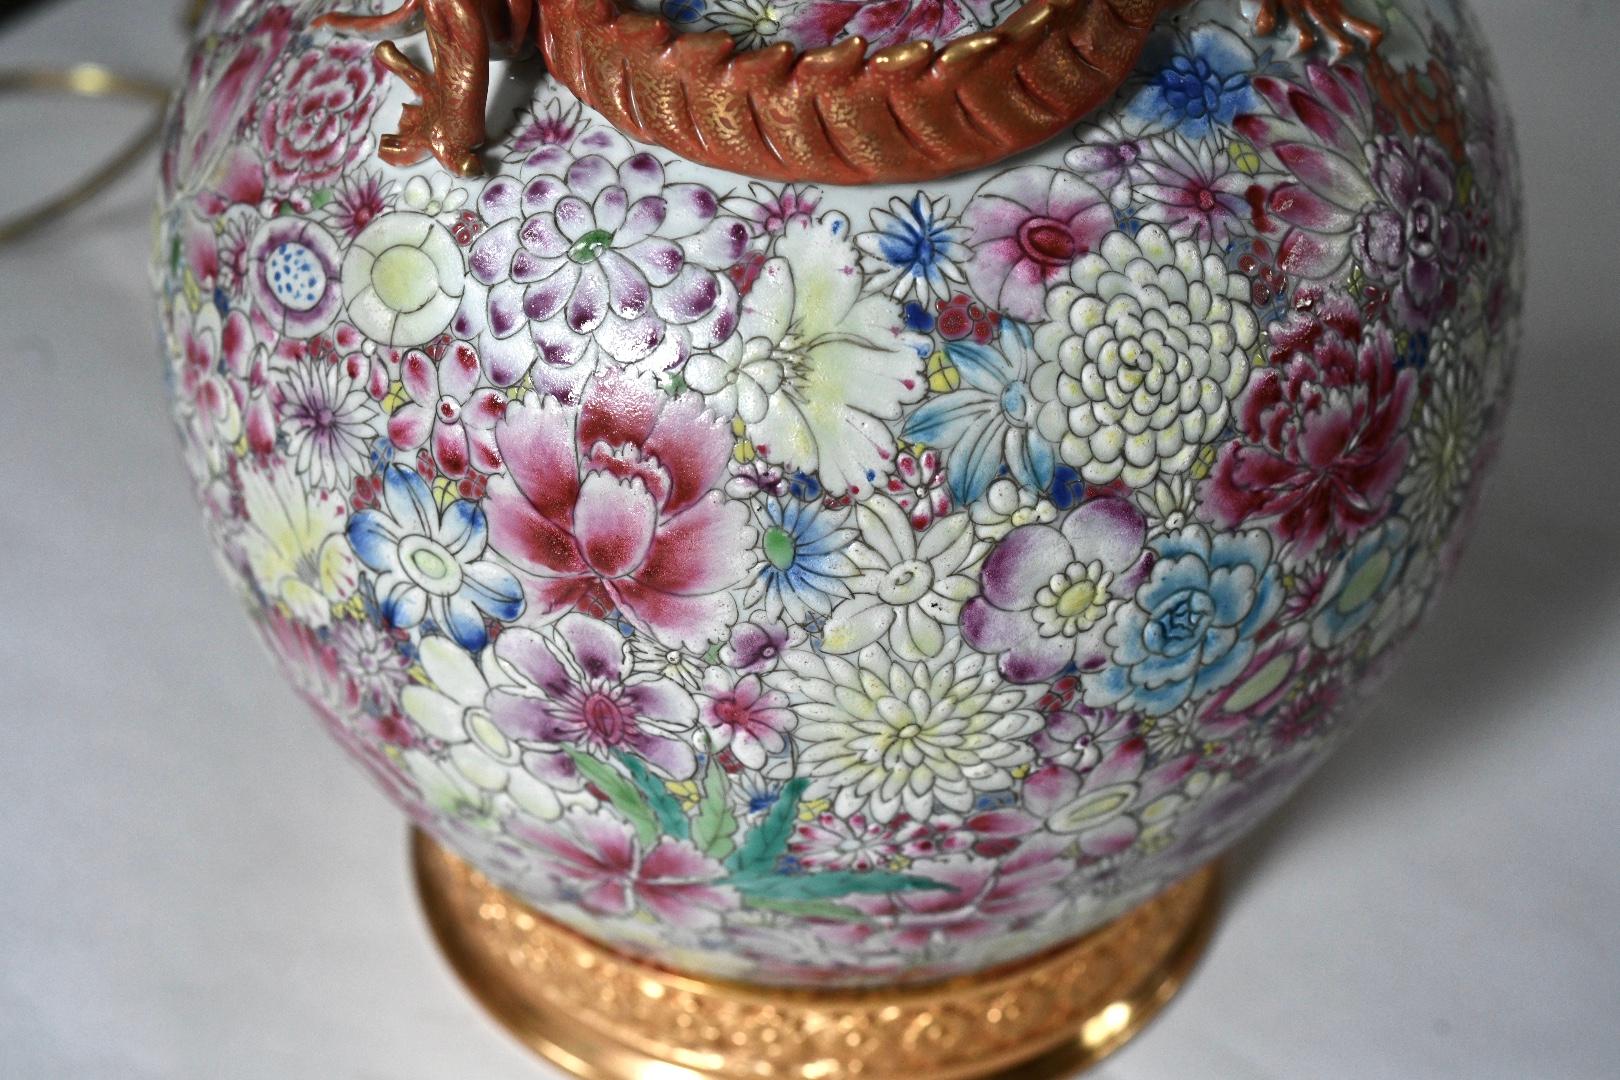 Pair of Famille rose porcelain lamps with flower blossoms and dragon decoration.
To the top of porcelain: 19